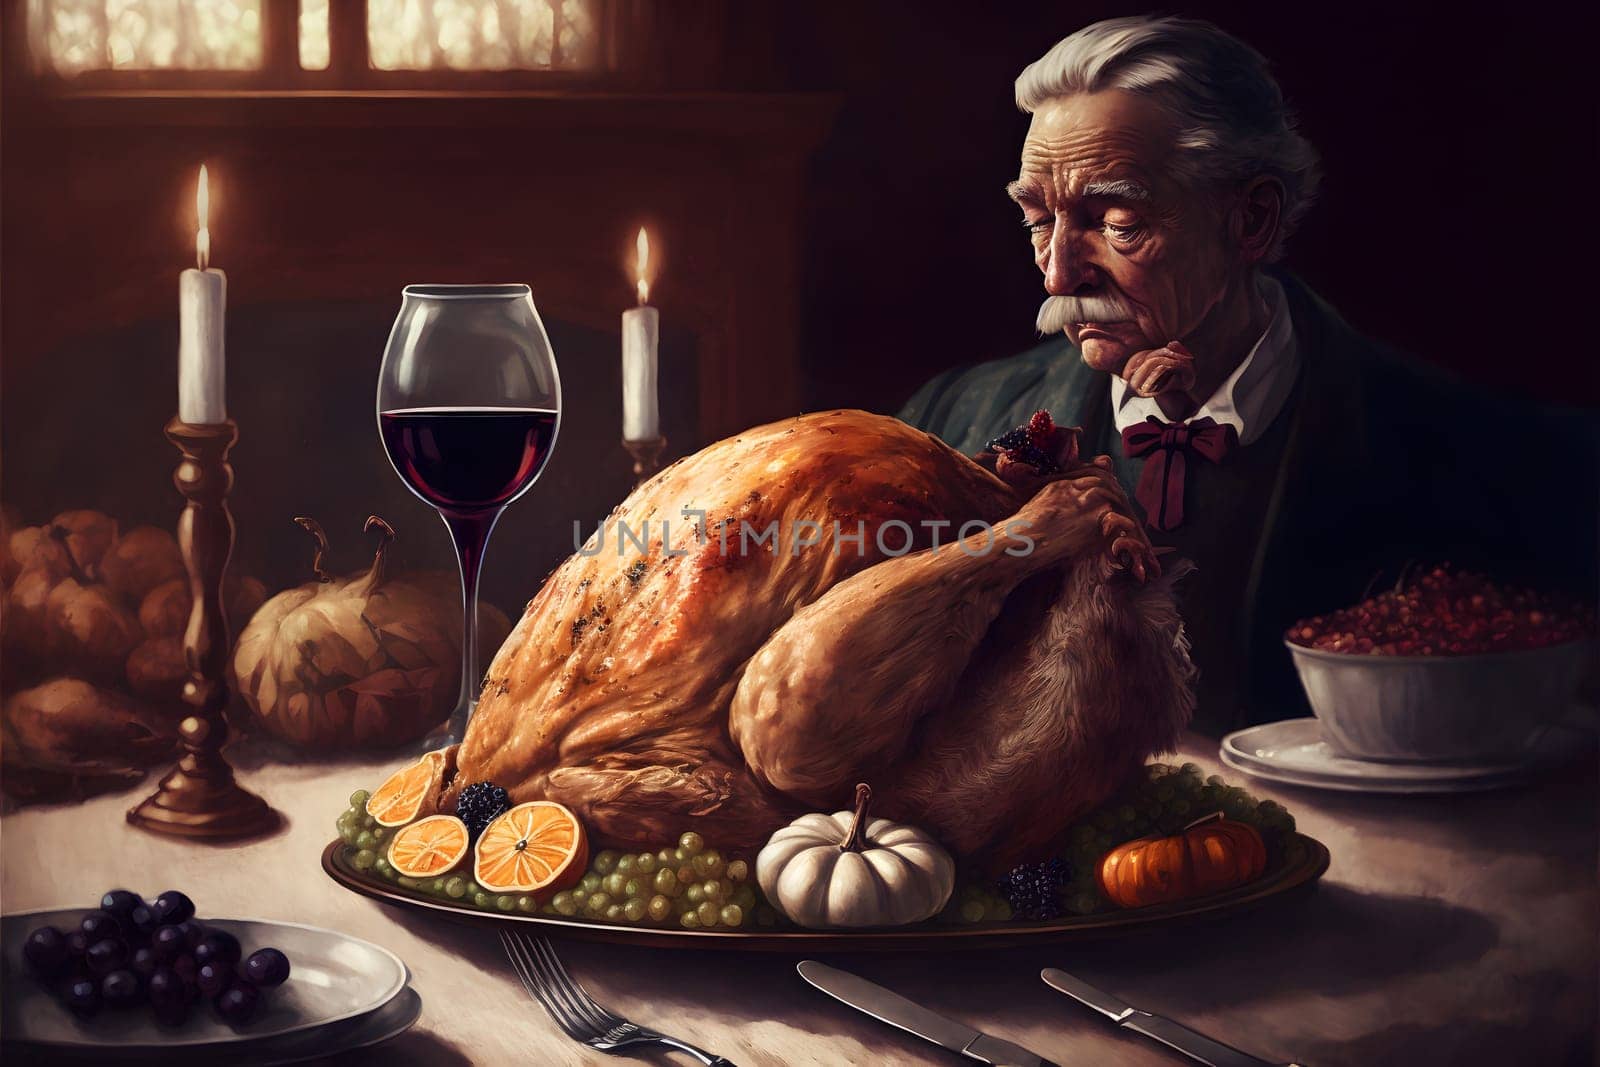 creepy old man at thanksgiving table with served roasted turkey, neural network generated art. Digitally generated image. Not based on any actual person, scene or pattern.